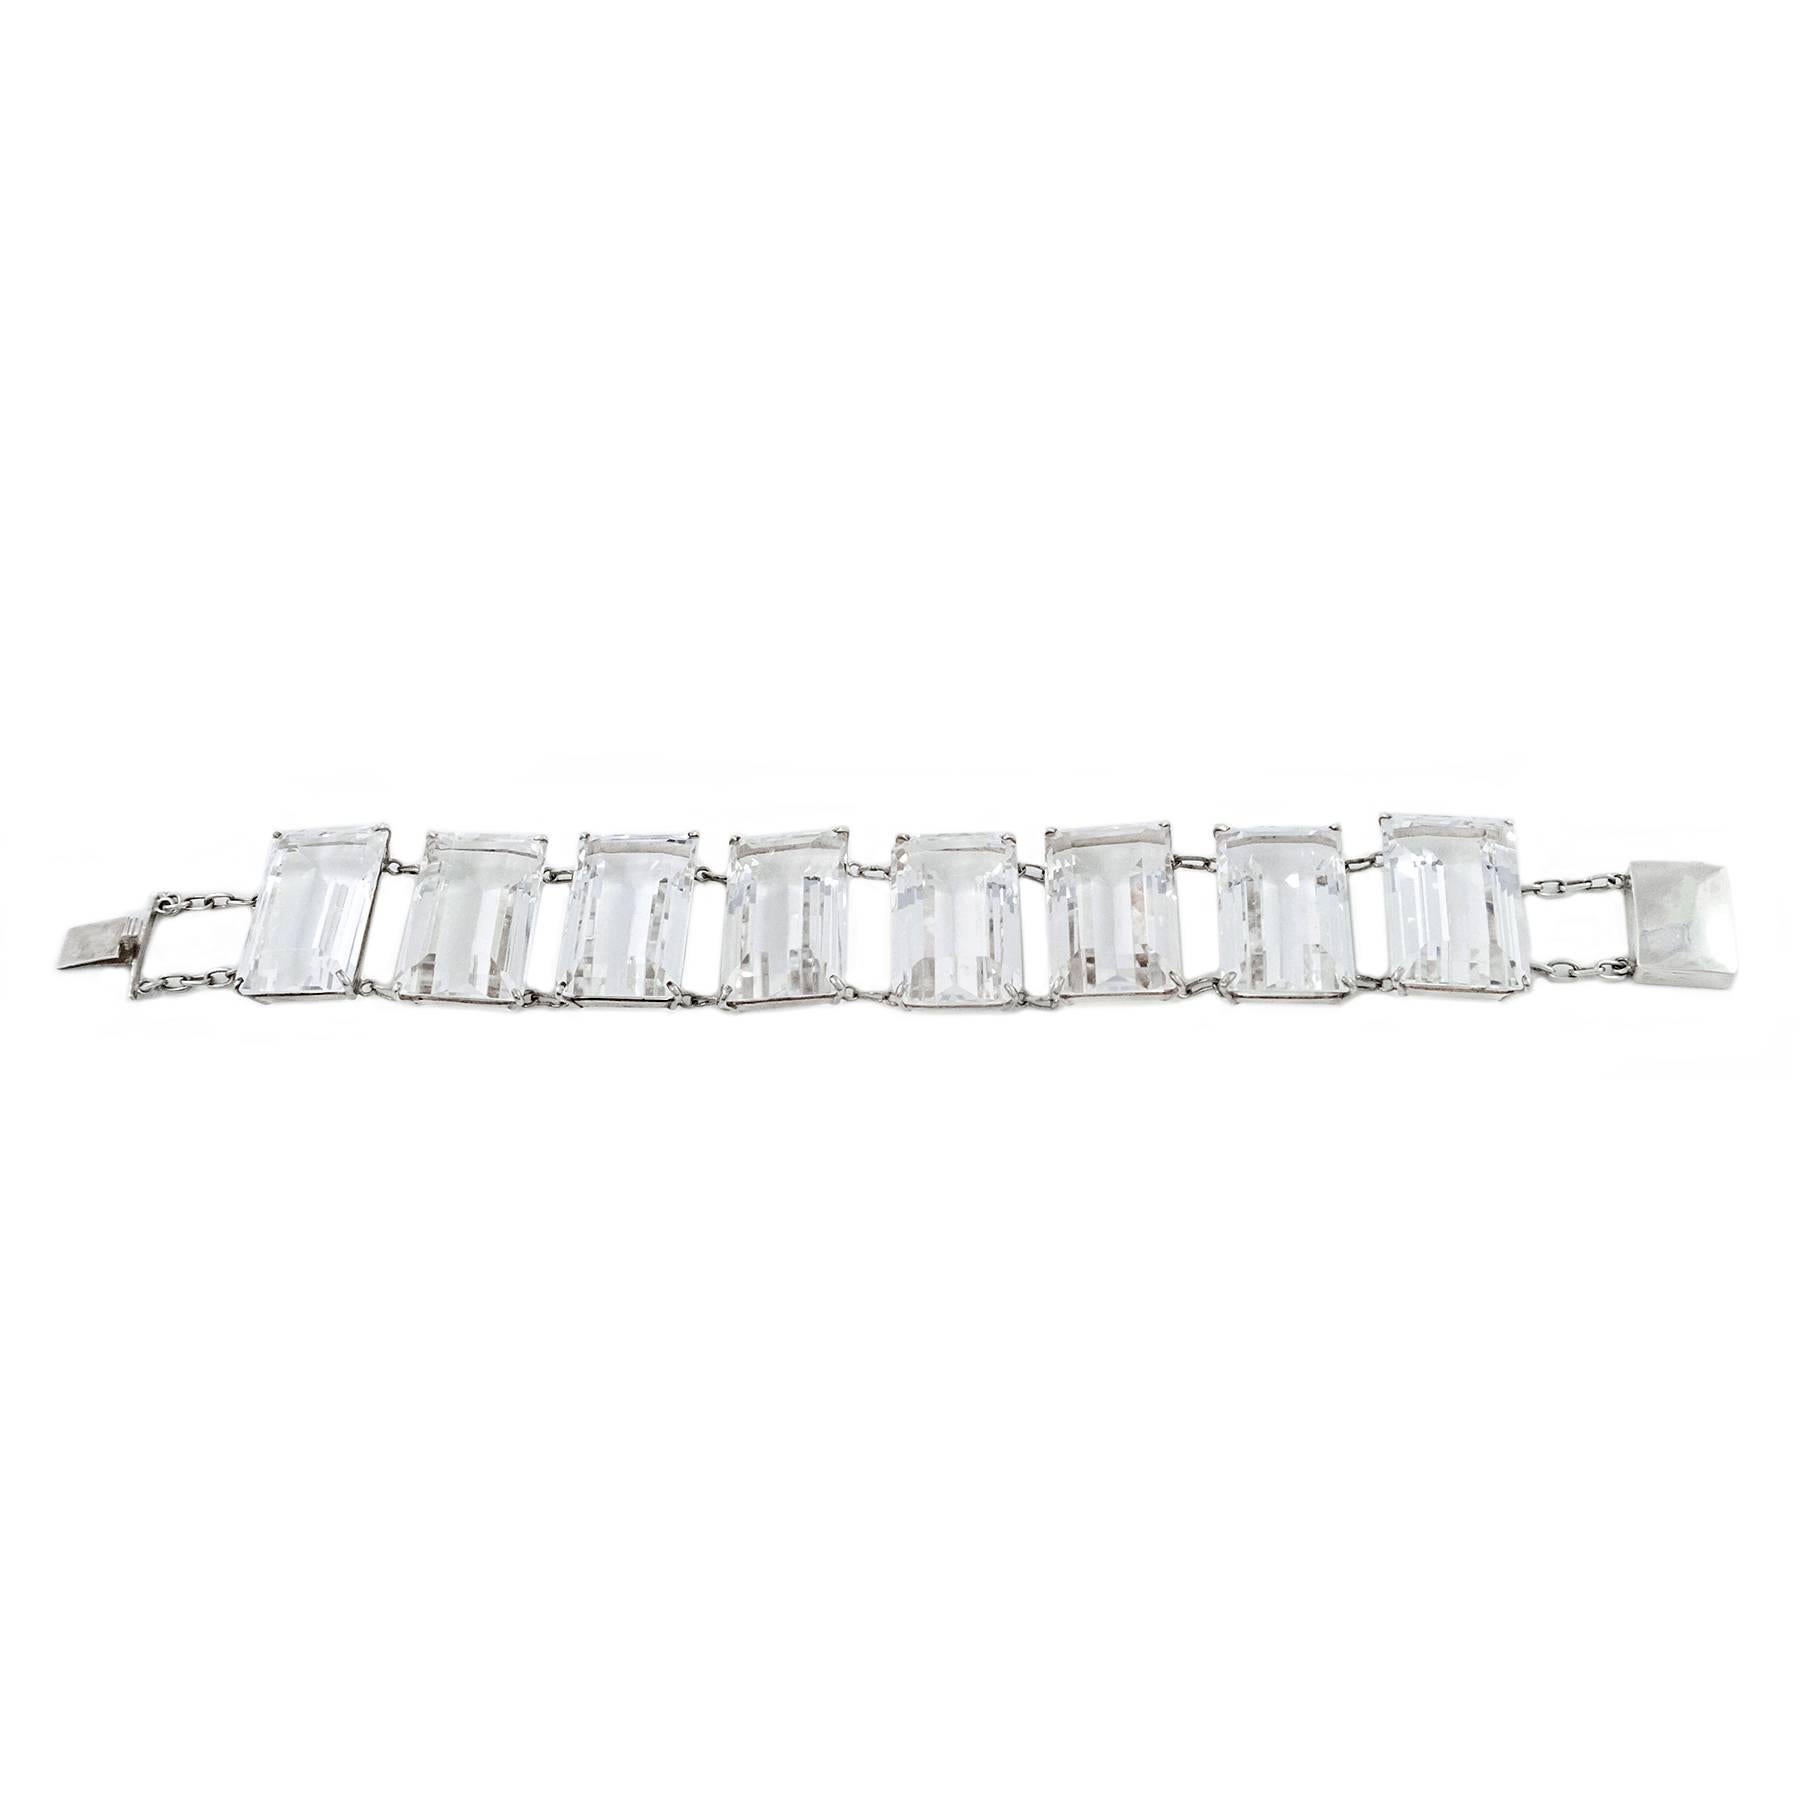 There are eight Emerald Cut clear Rock Crystal Quartz gemstones, totaling 235.13 carats, set in this beautiful bracelet.

The hand cut and faceted stones measure  24mm x 15mm x 9.90mm by gauge and formula, claw set in sterling silver mounts that are